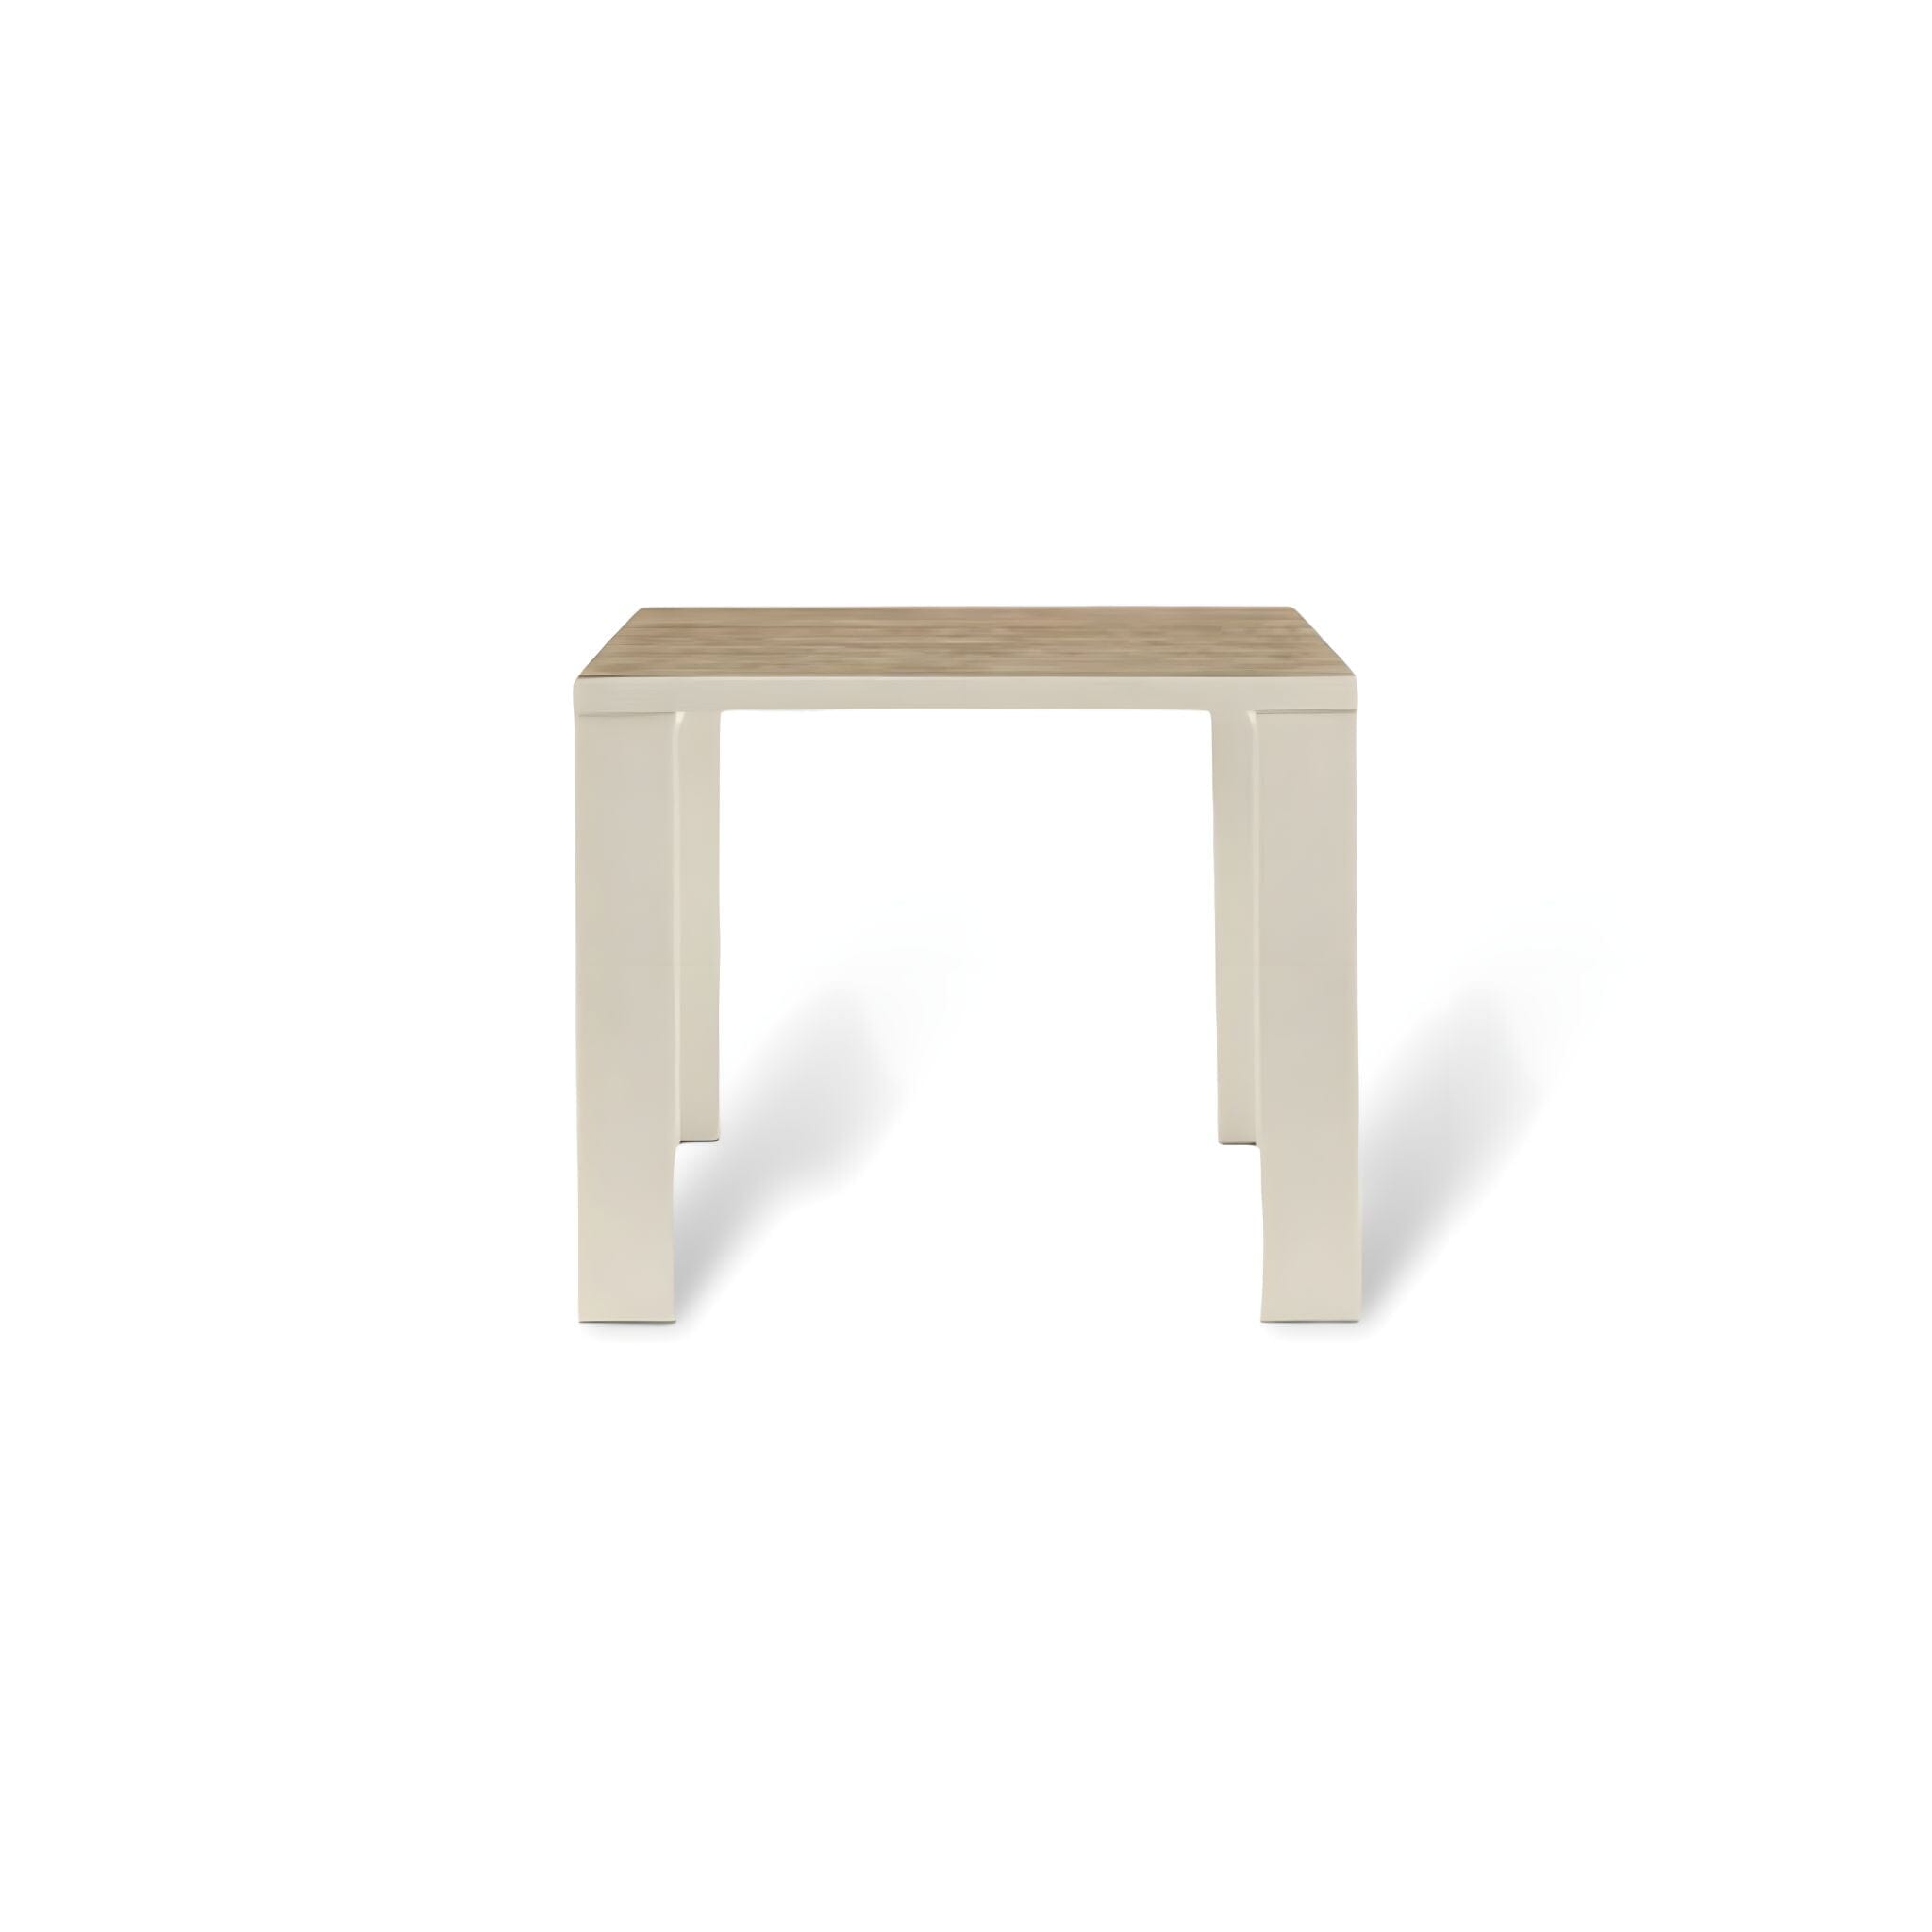 Terrasse Outdoor Collection Outdoor Furniture Wooden Square Table 